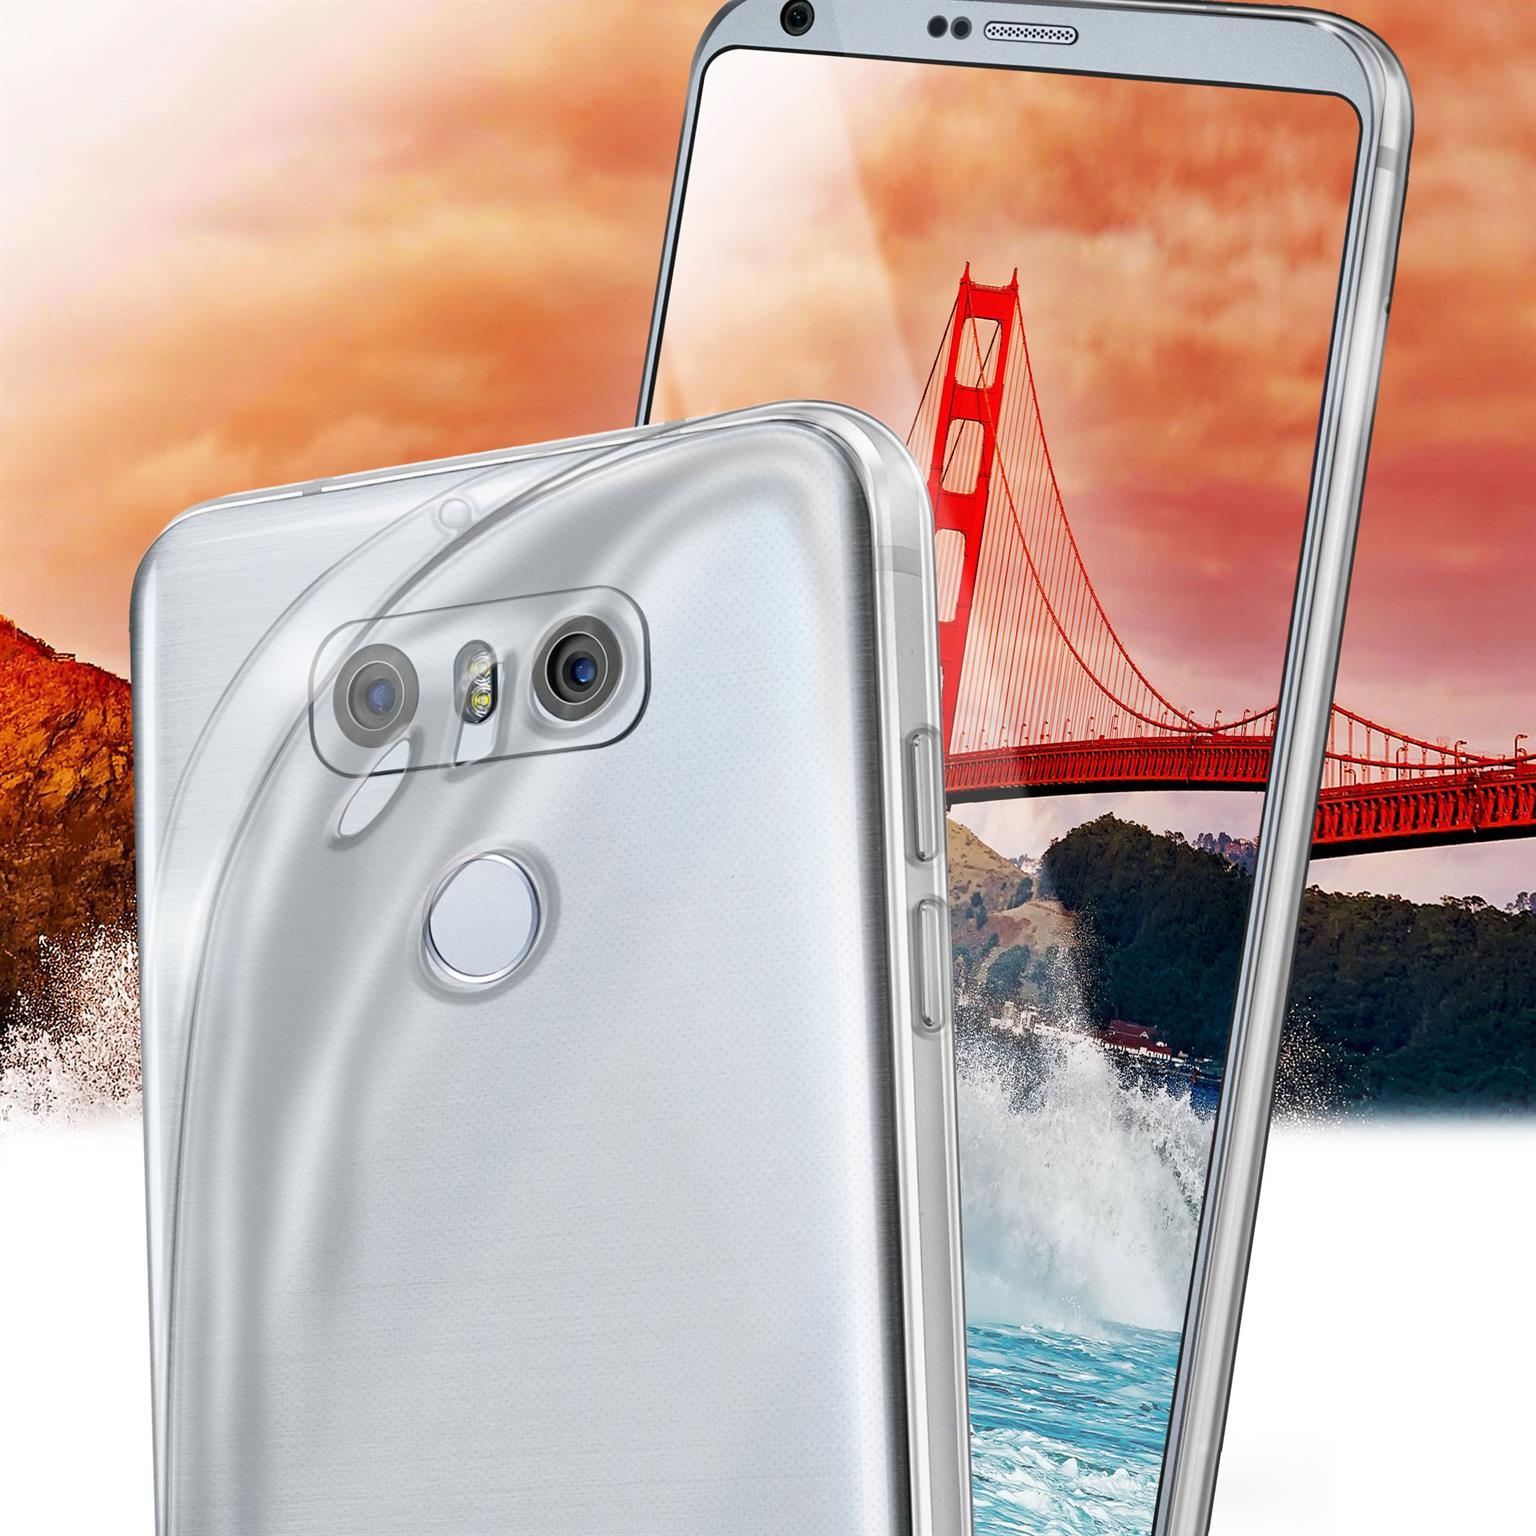 MOEX Aero Case, Crystal-Clear LG, G6, Backcover